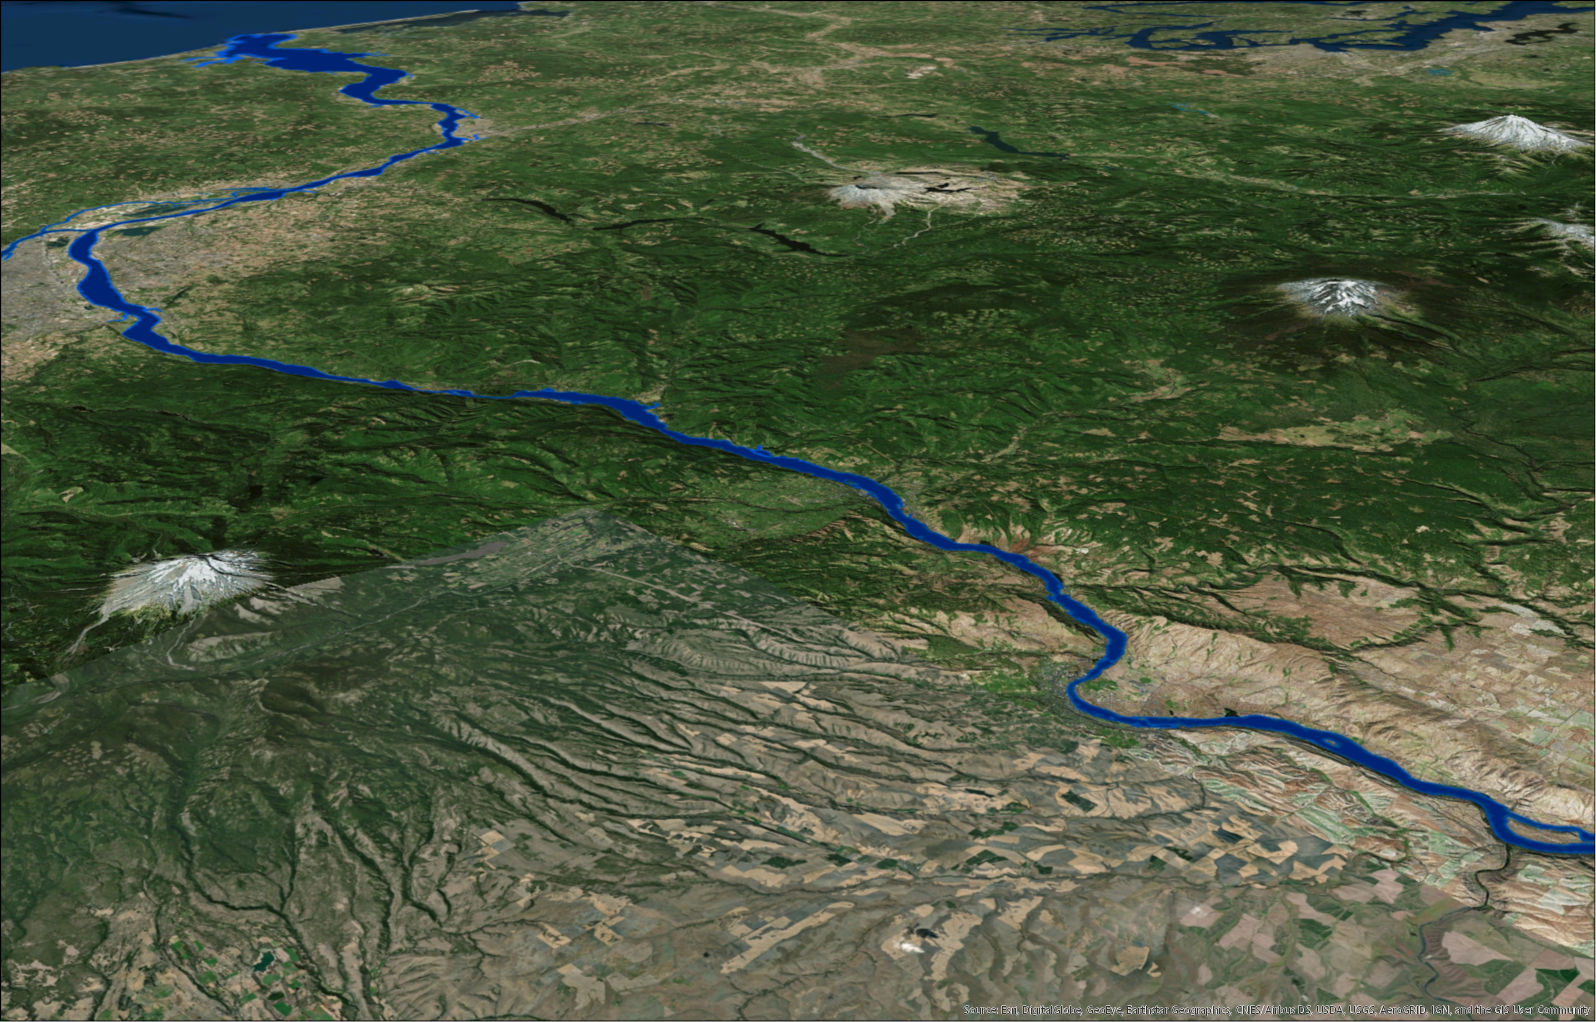 An aerial view of the middle and lower Columbia River to the Pacific Ocean. Image: ESRI/Lower Columbia Estuary Partnership